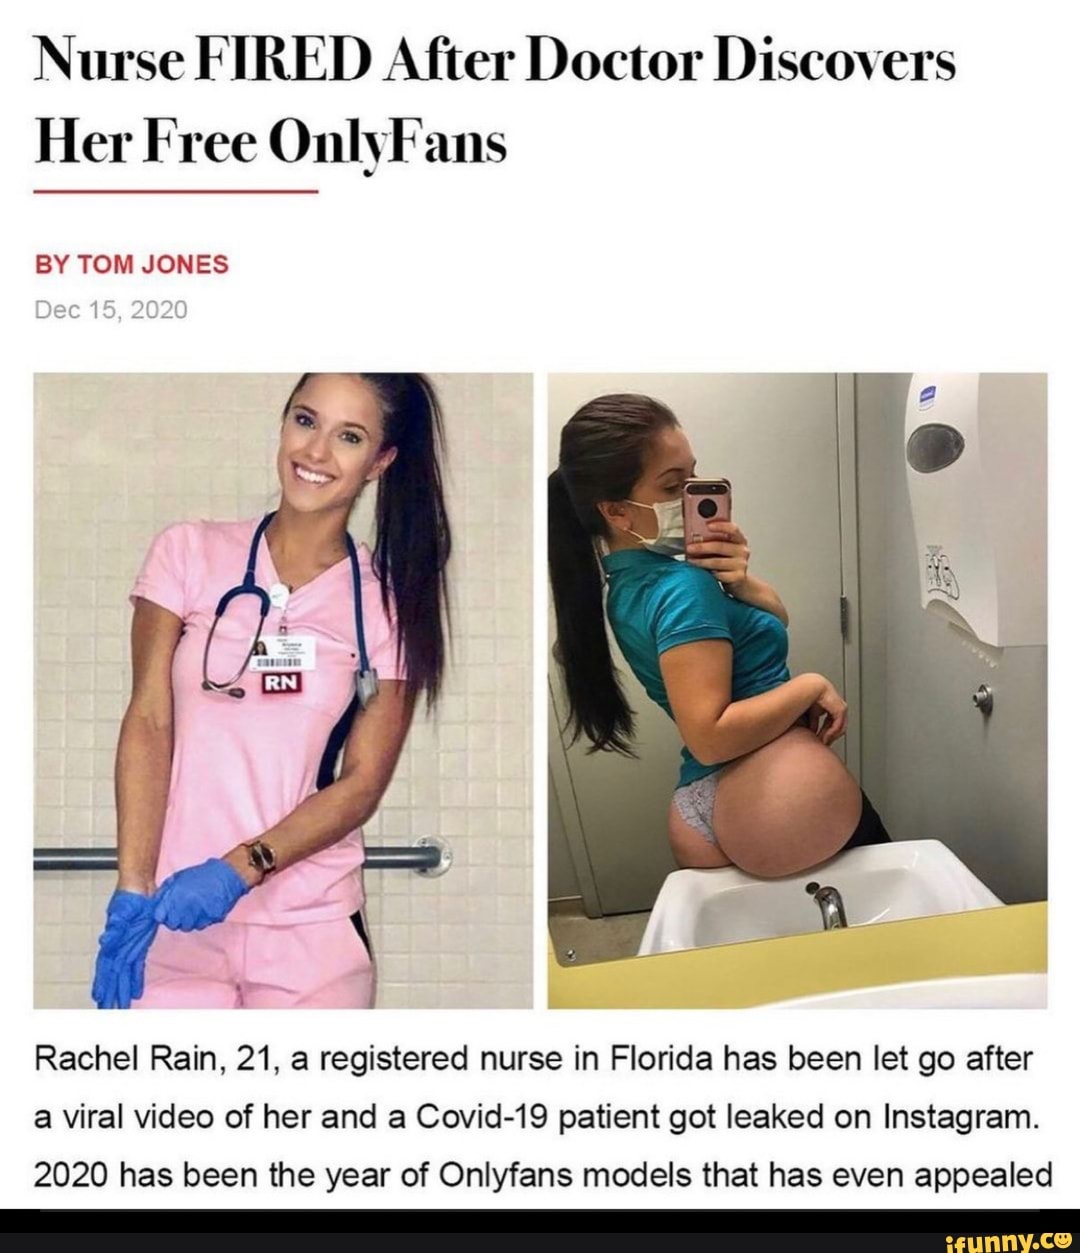 Nurse gets fired for having only fans